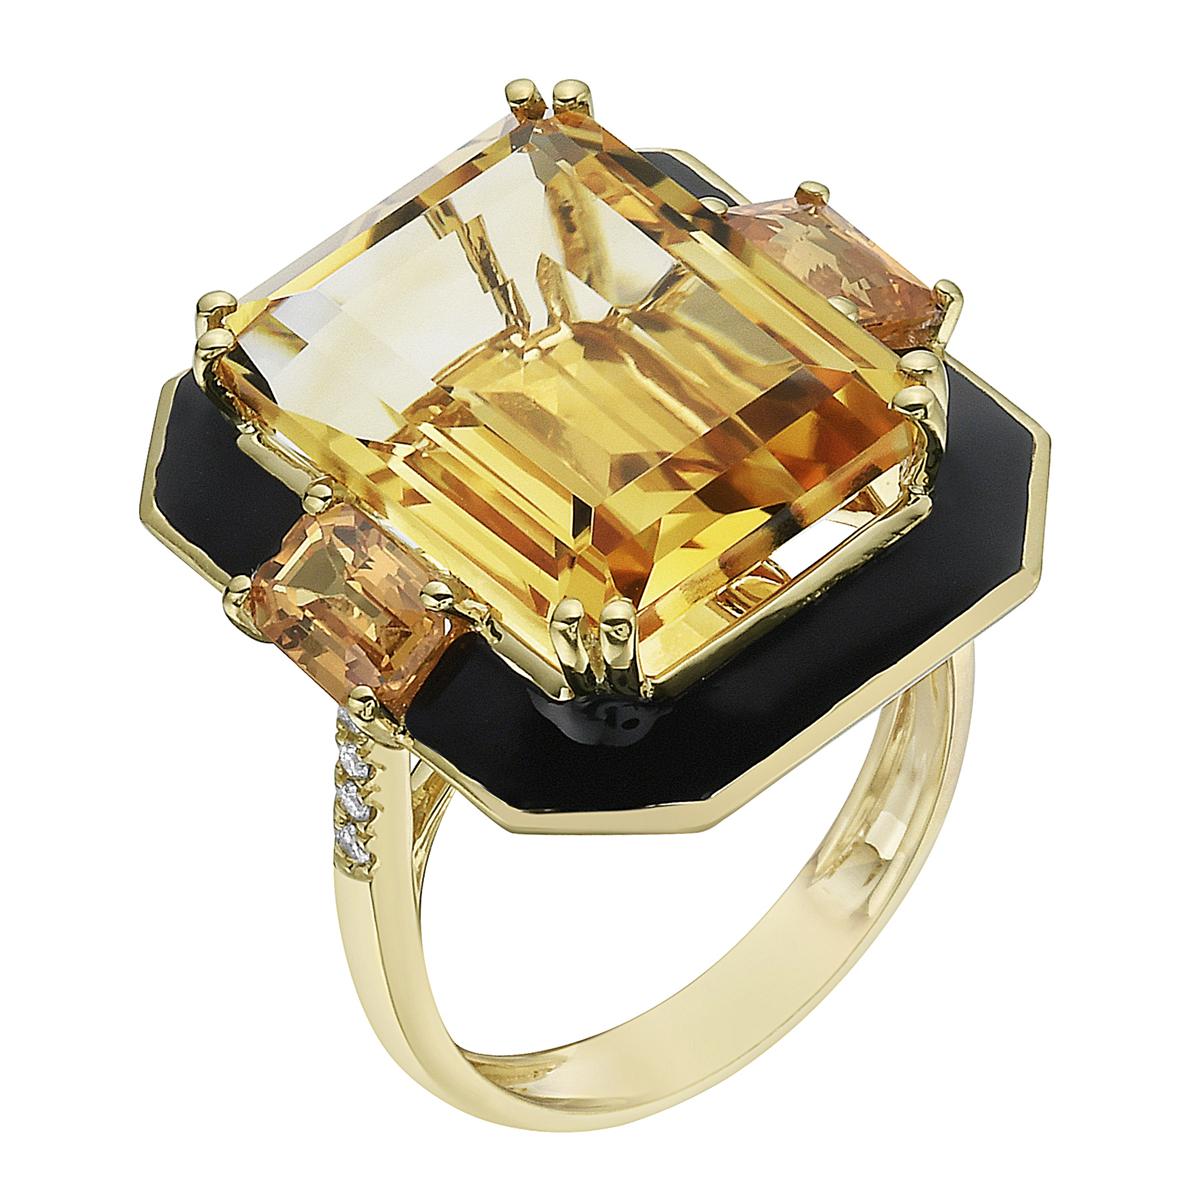 With this exquisite semi-precious Citrine yellow gold diamond ring, style and glamour are in the spotlight. This 18-karat emerald cut ring is made from 5.53 grams of gold, 3 Citrines totaling 12.78 karats, and is surrounded by black enamel and has